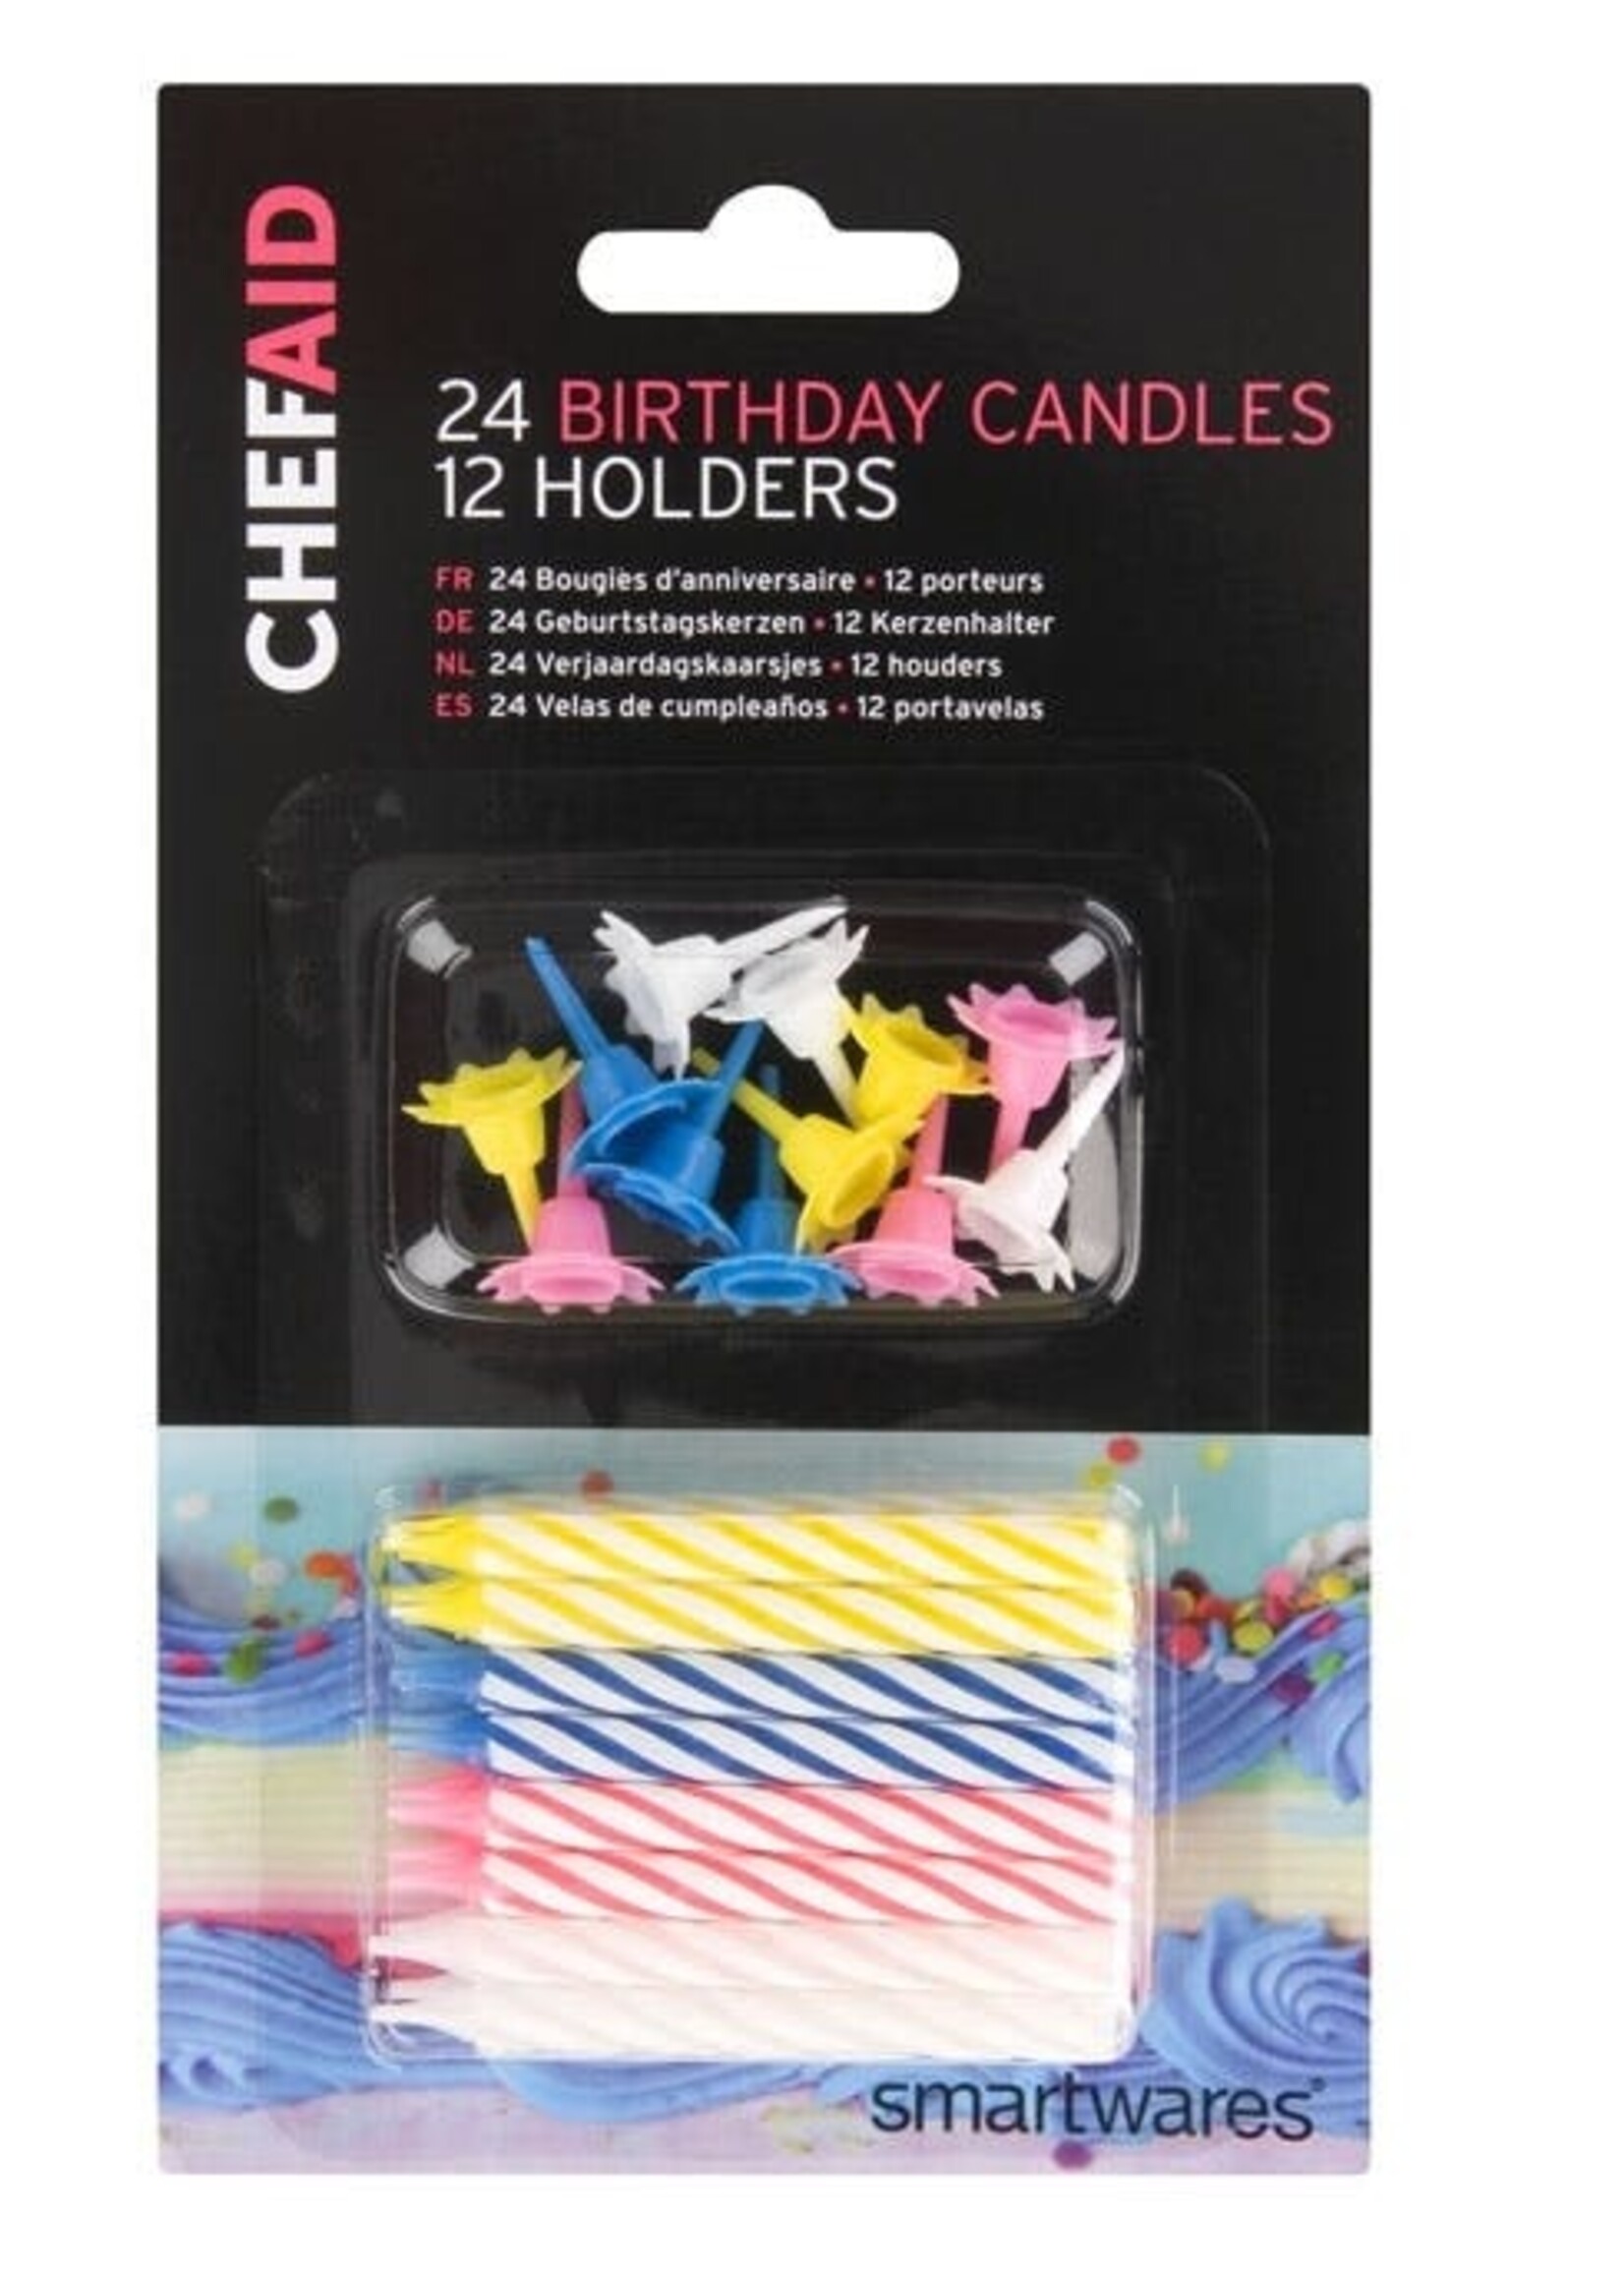 Chef aid Chef Aid 24 Birthday Candles 12 Holders